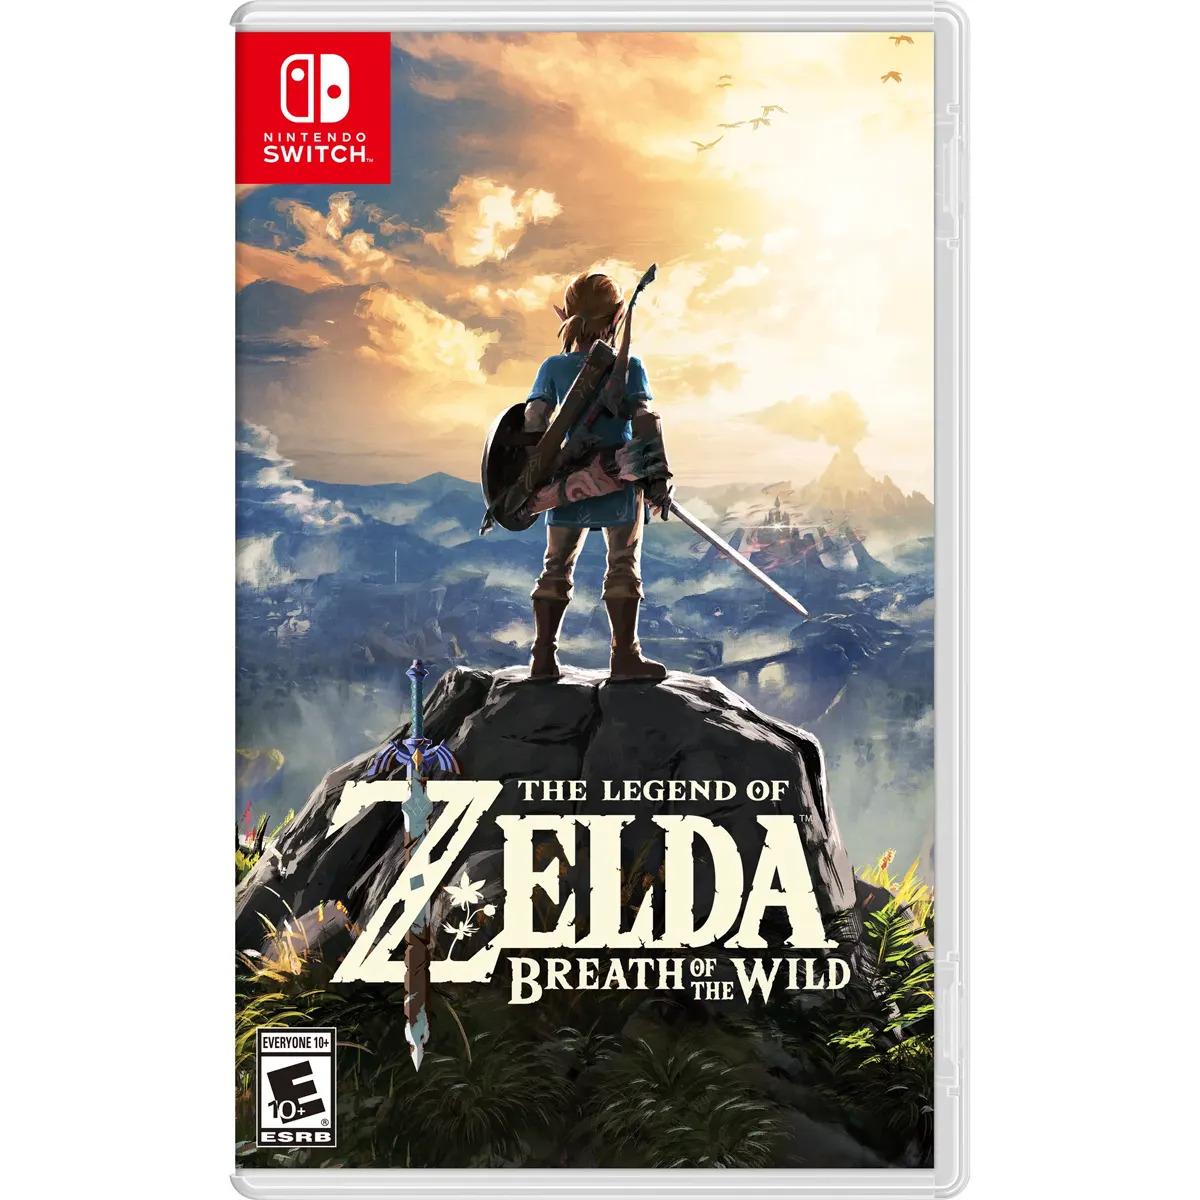 The Legend of Zelda Breath of the Wild Nintendo Switch for $39.99 Shipped